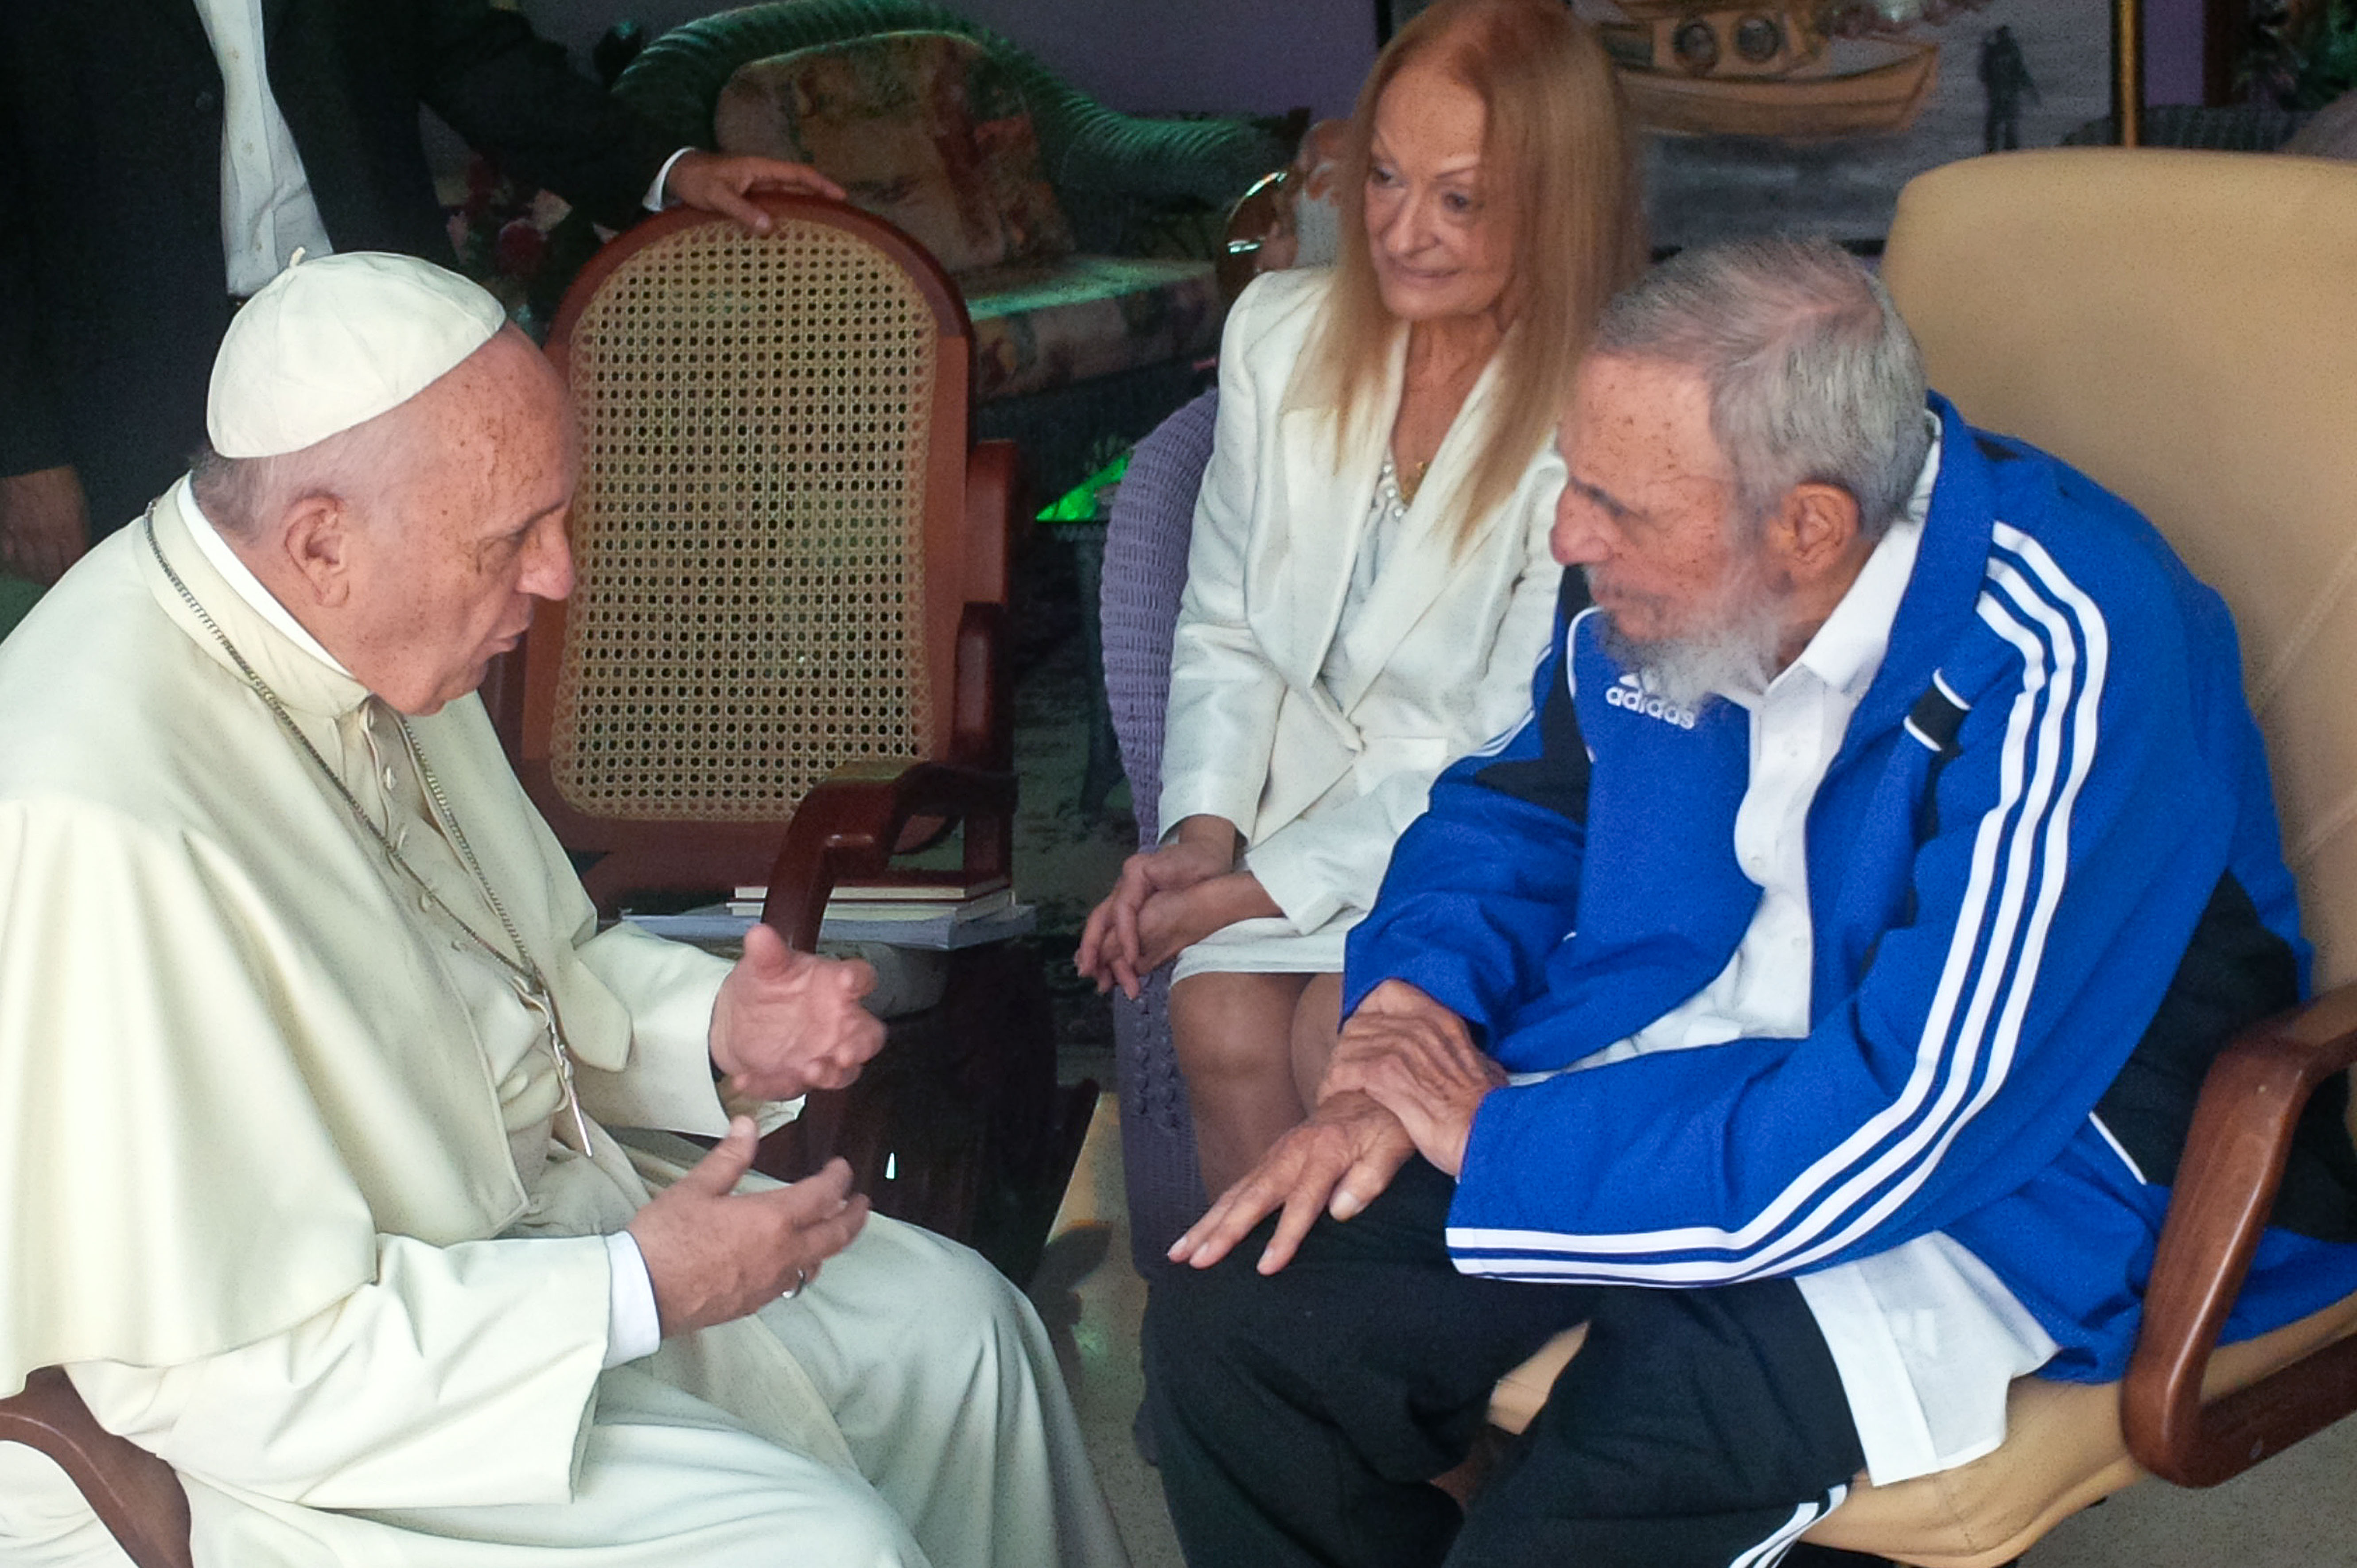 September 20 2015 : Pope Francis meets Fidel Castro at his home in Havana, Cuba.